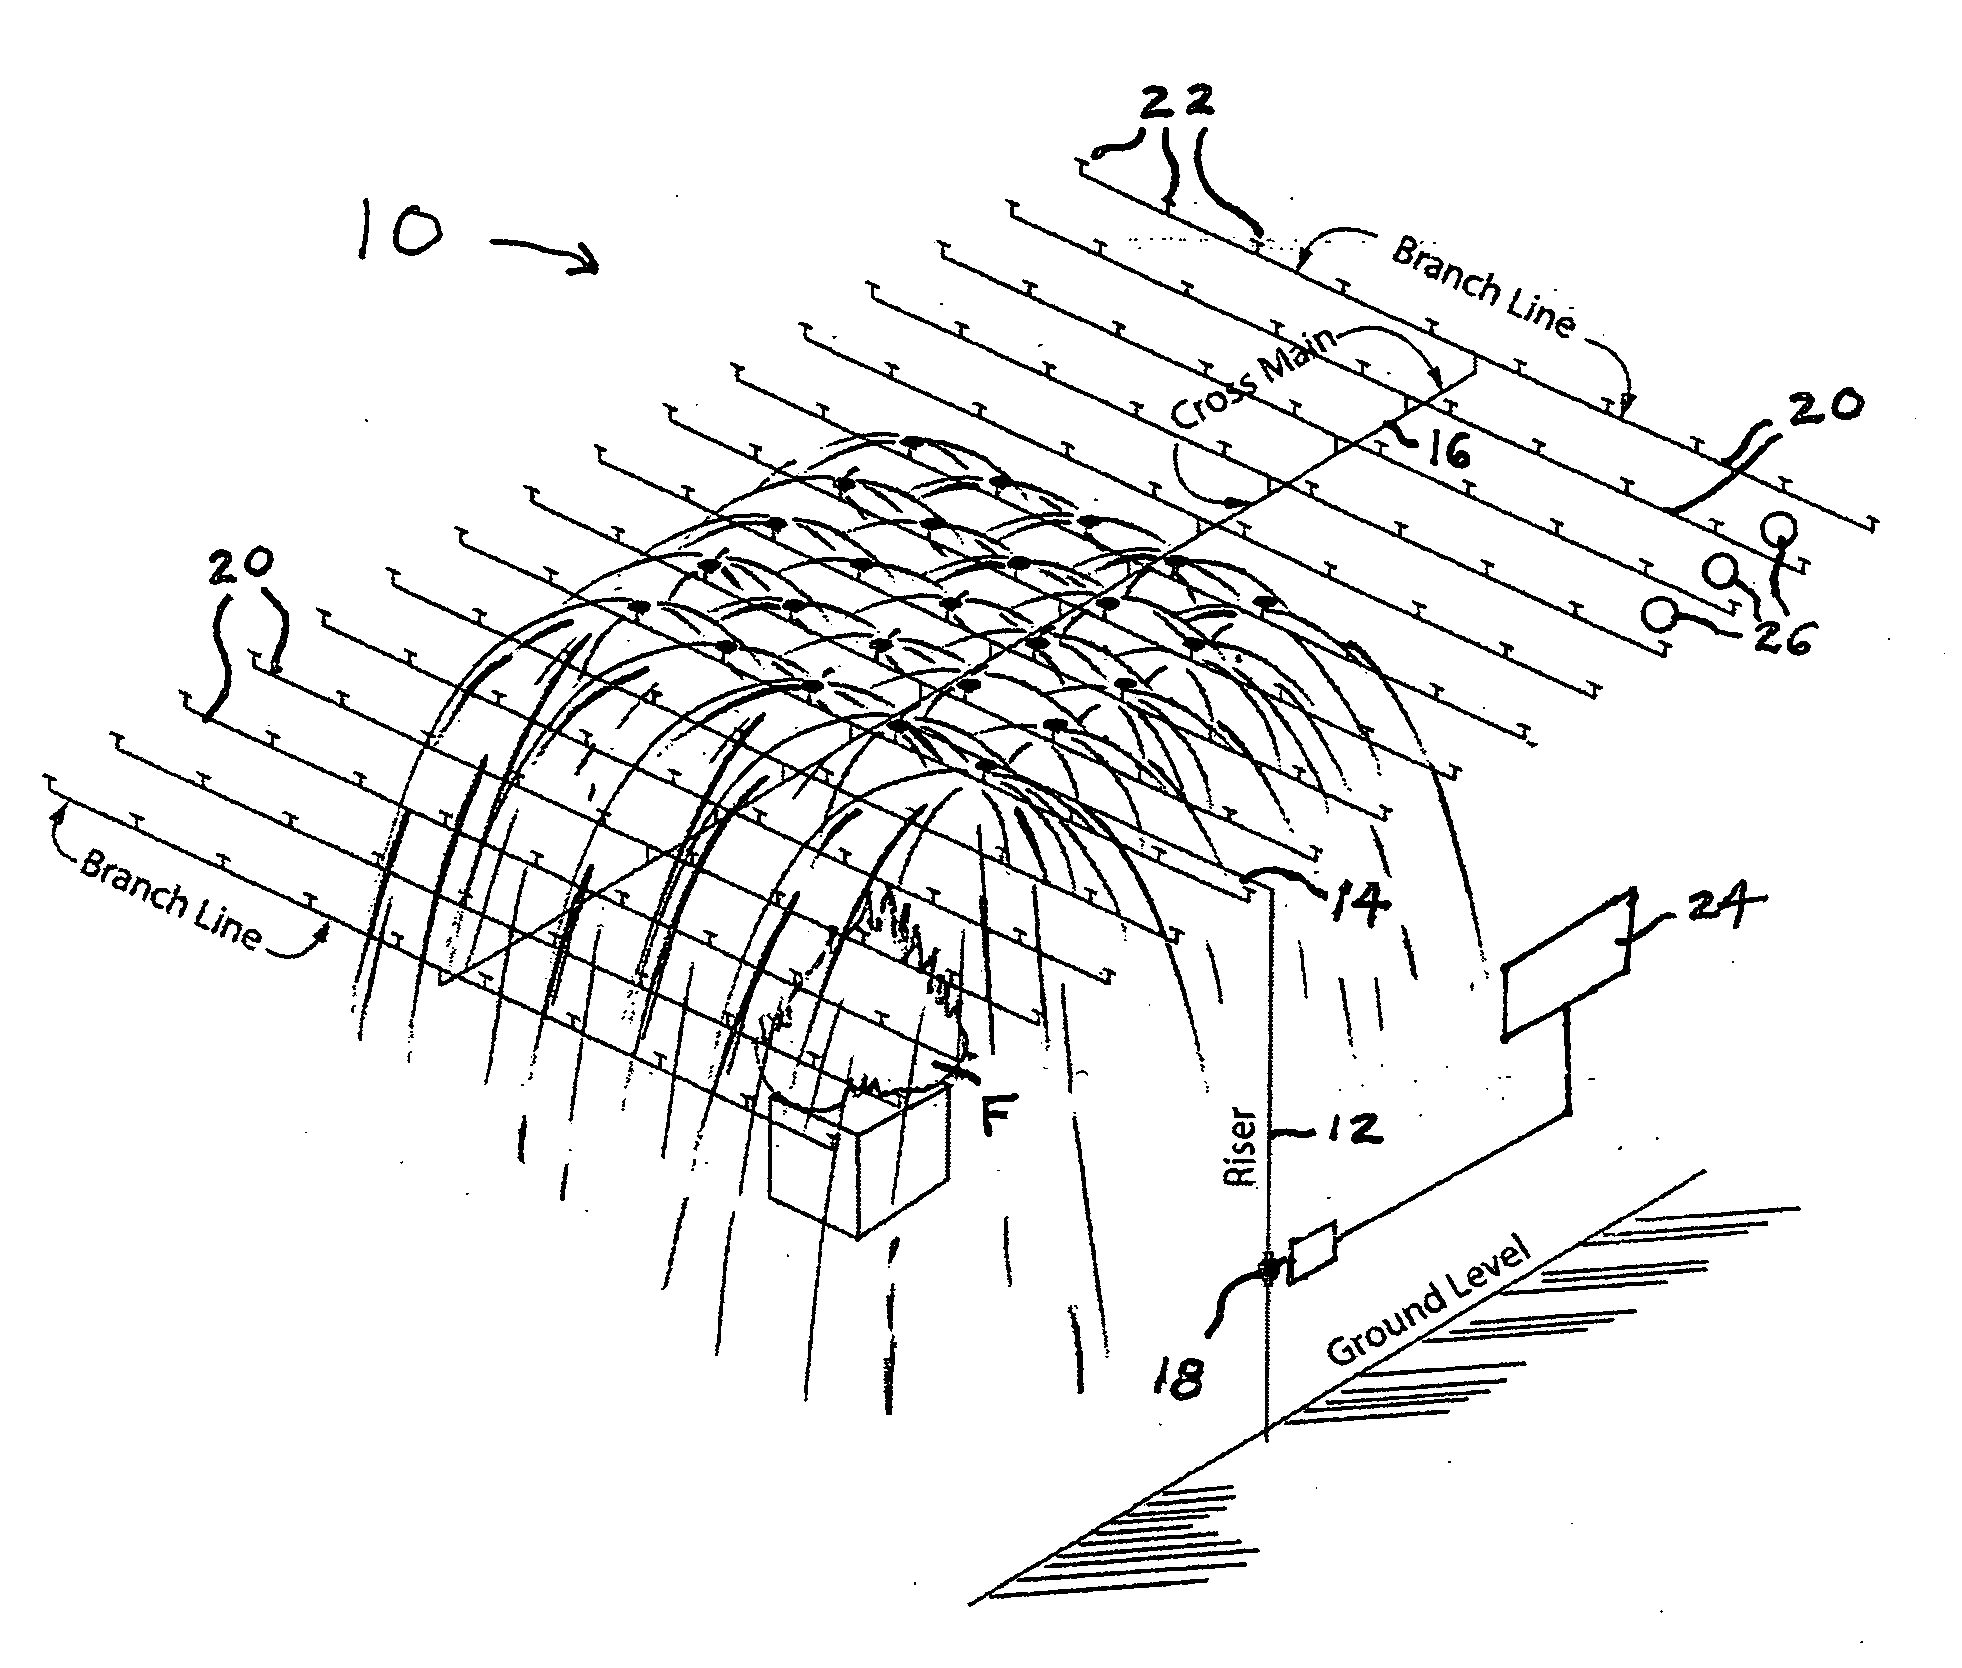 Deluge-like sprinkler fire scheme using high thermal sensitivity and high temperature rating sensing elements